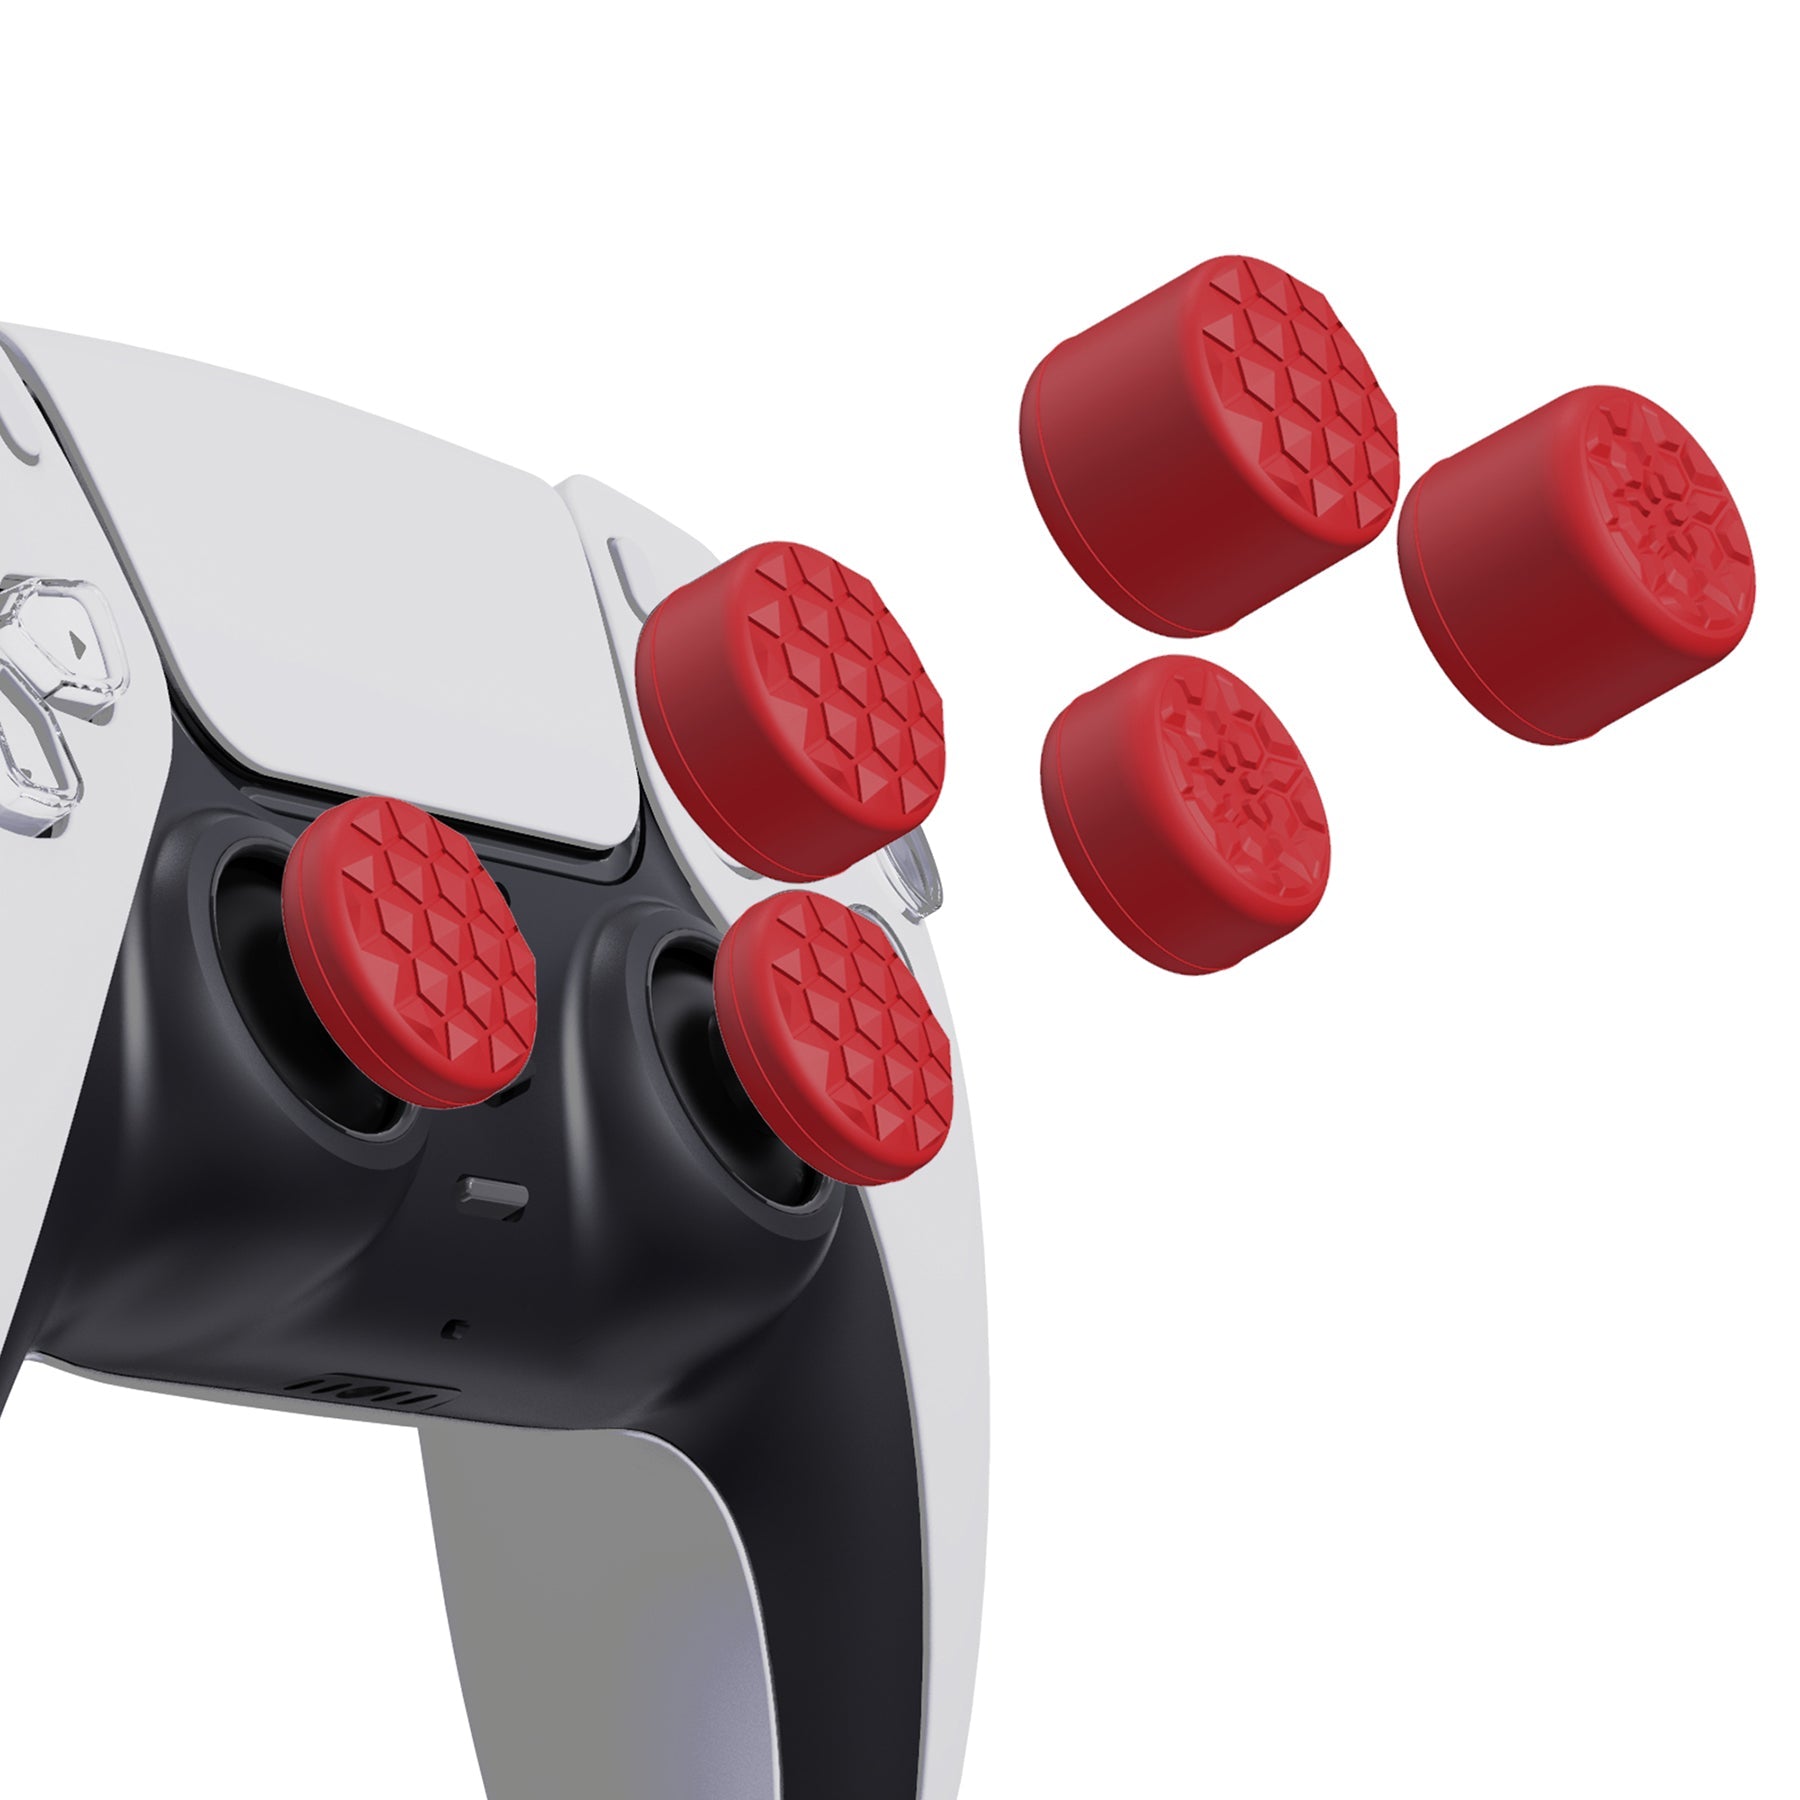 PlayVital Passion Red Ergonomic Stick Caps Thumb Grips for PS5, PS4, Xbox Series X/S, Xbox One, Xbox One X/S, Switch Pro Controller - with 3 Height Convex and Concave - Diamond Grain & Crack Bomb Design - PJM2015 PlayVital